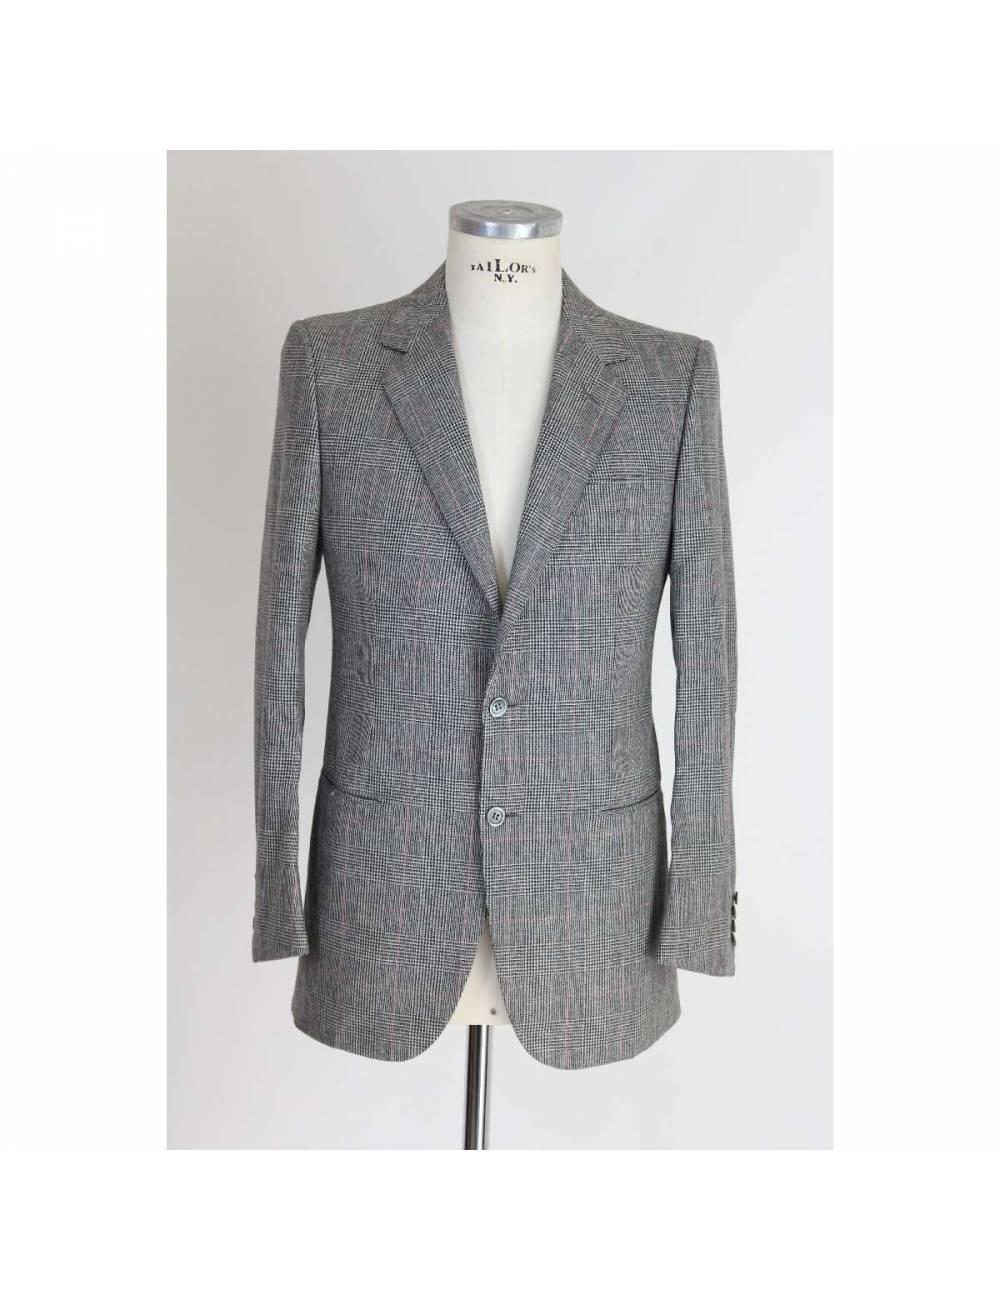 Brioni vintage Prince of Wales men's suit. 100% wool fitted jacket. Made in Italy size 47, new with label. Excellent manufacture.

Size 47 It 37 Us 37 Uk

Shoulders: 46 cm
Bust / chest: 49 cm
Sleeves: 62 cm
Length: 84 cm
Waist trousers: 40 cm
Pants